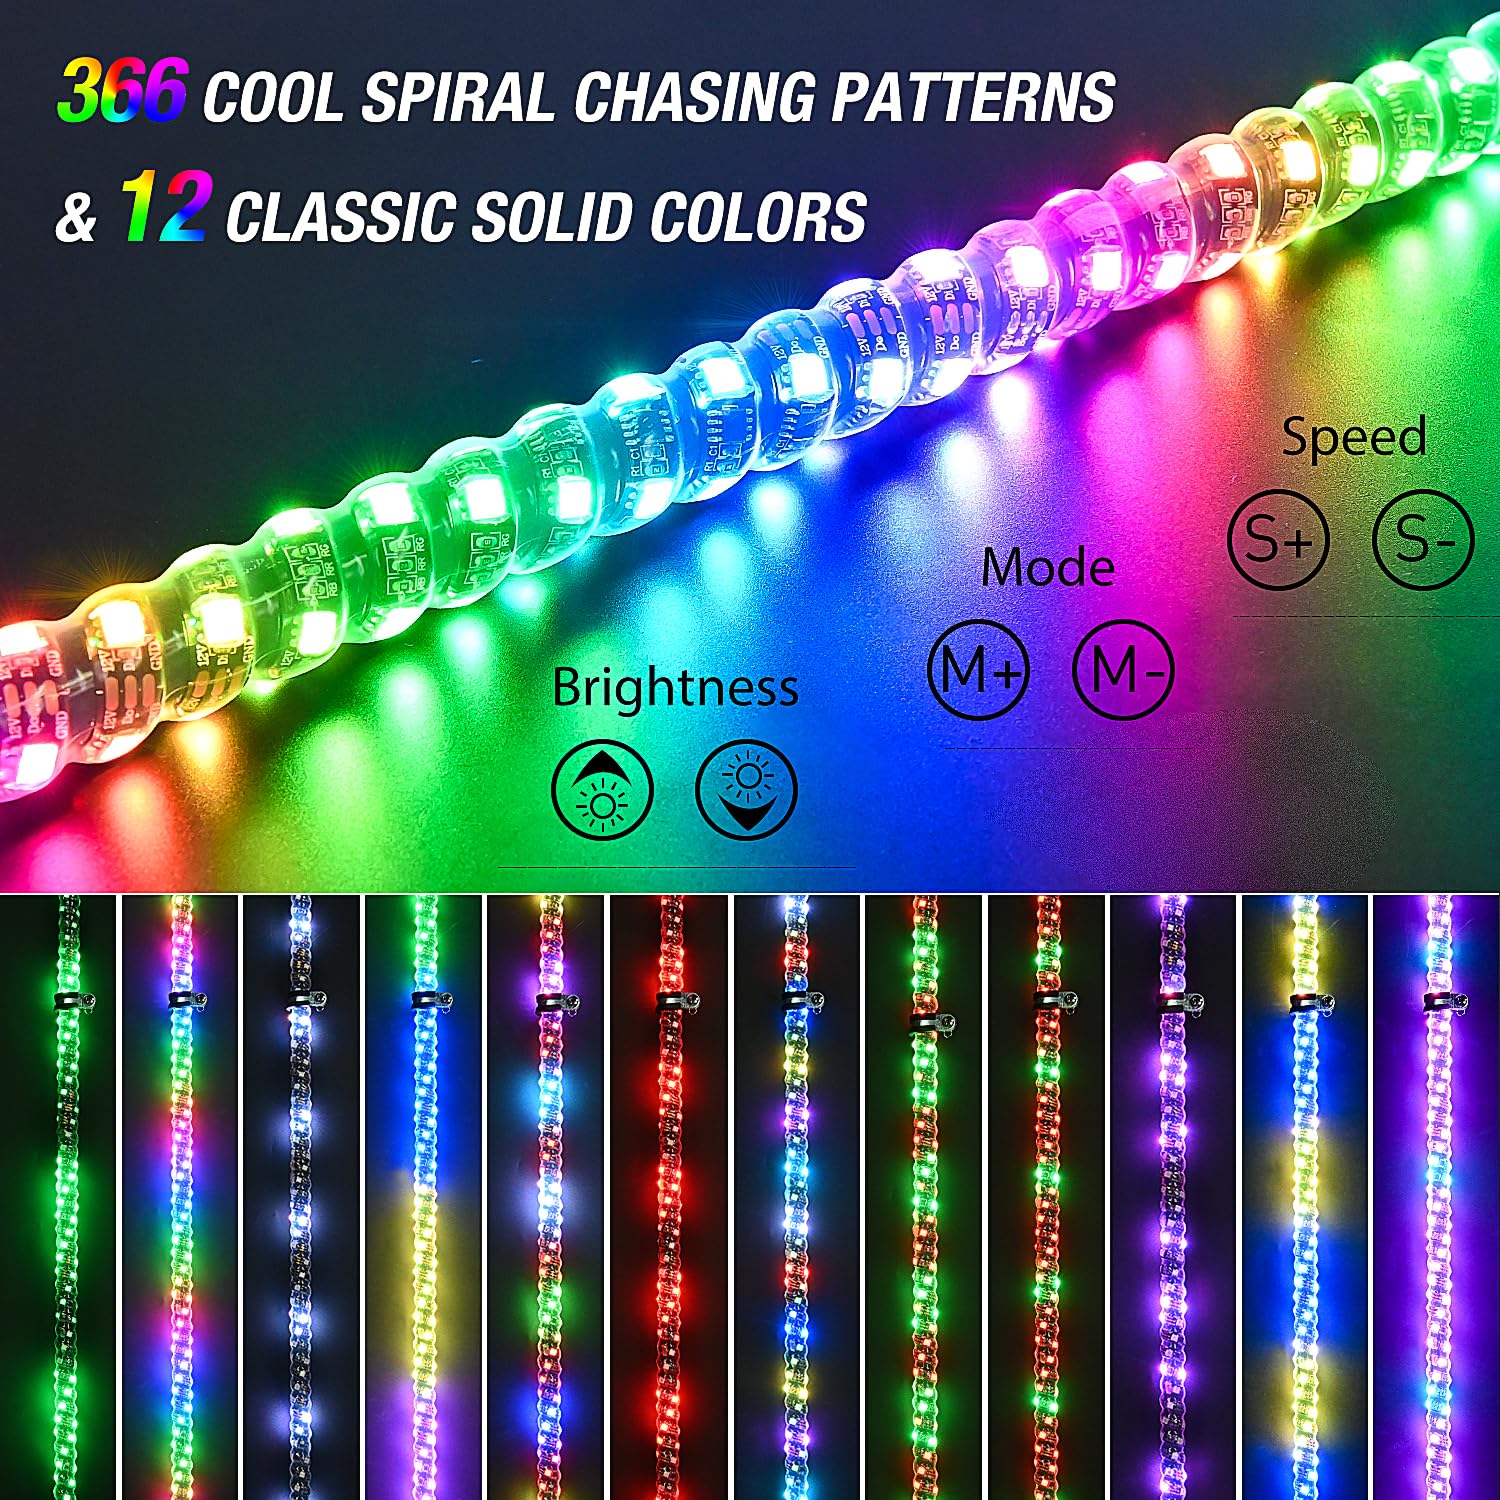 Nilight 2PCS 2FT Spiral RGB Led Whip Light w/RGB Chasing/Dancing Light RF Remote Control Lighted Antenna Whips for Can-am ATV UTV RZR Polaris Dune Buggy 4-Wheeler Offroad Truck, 2 Year Warranty